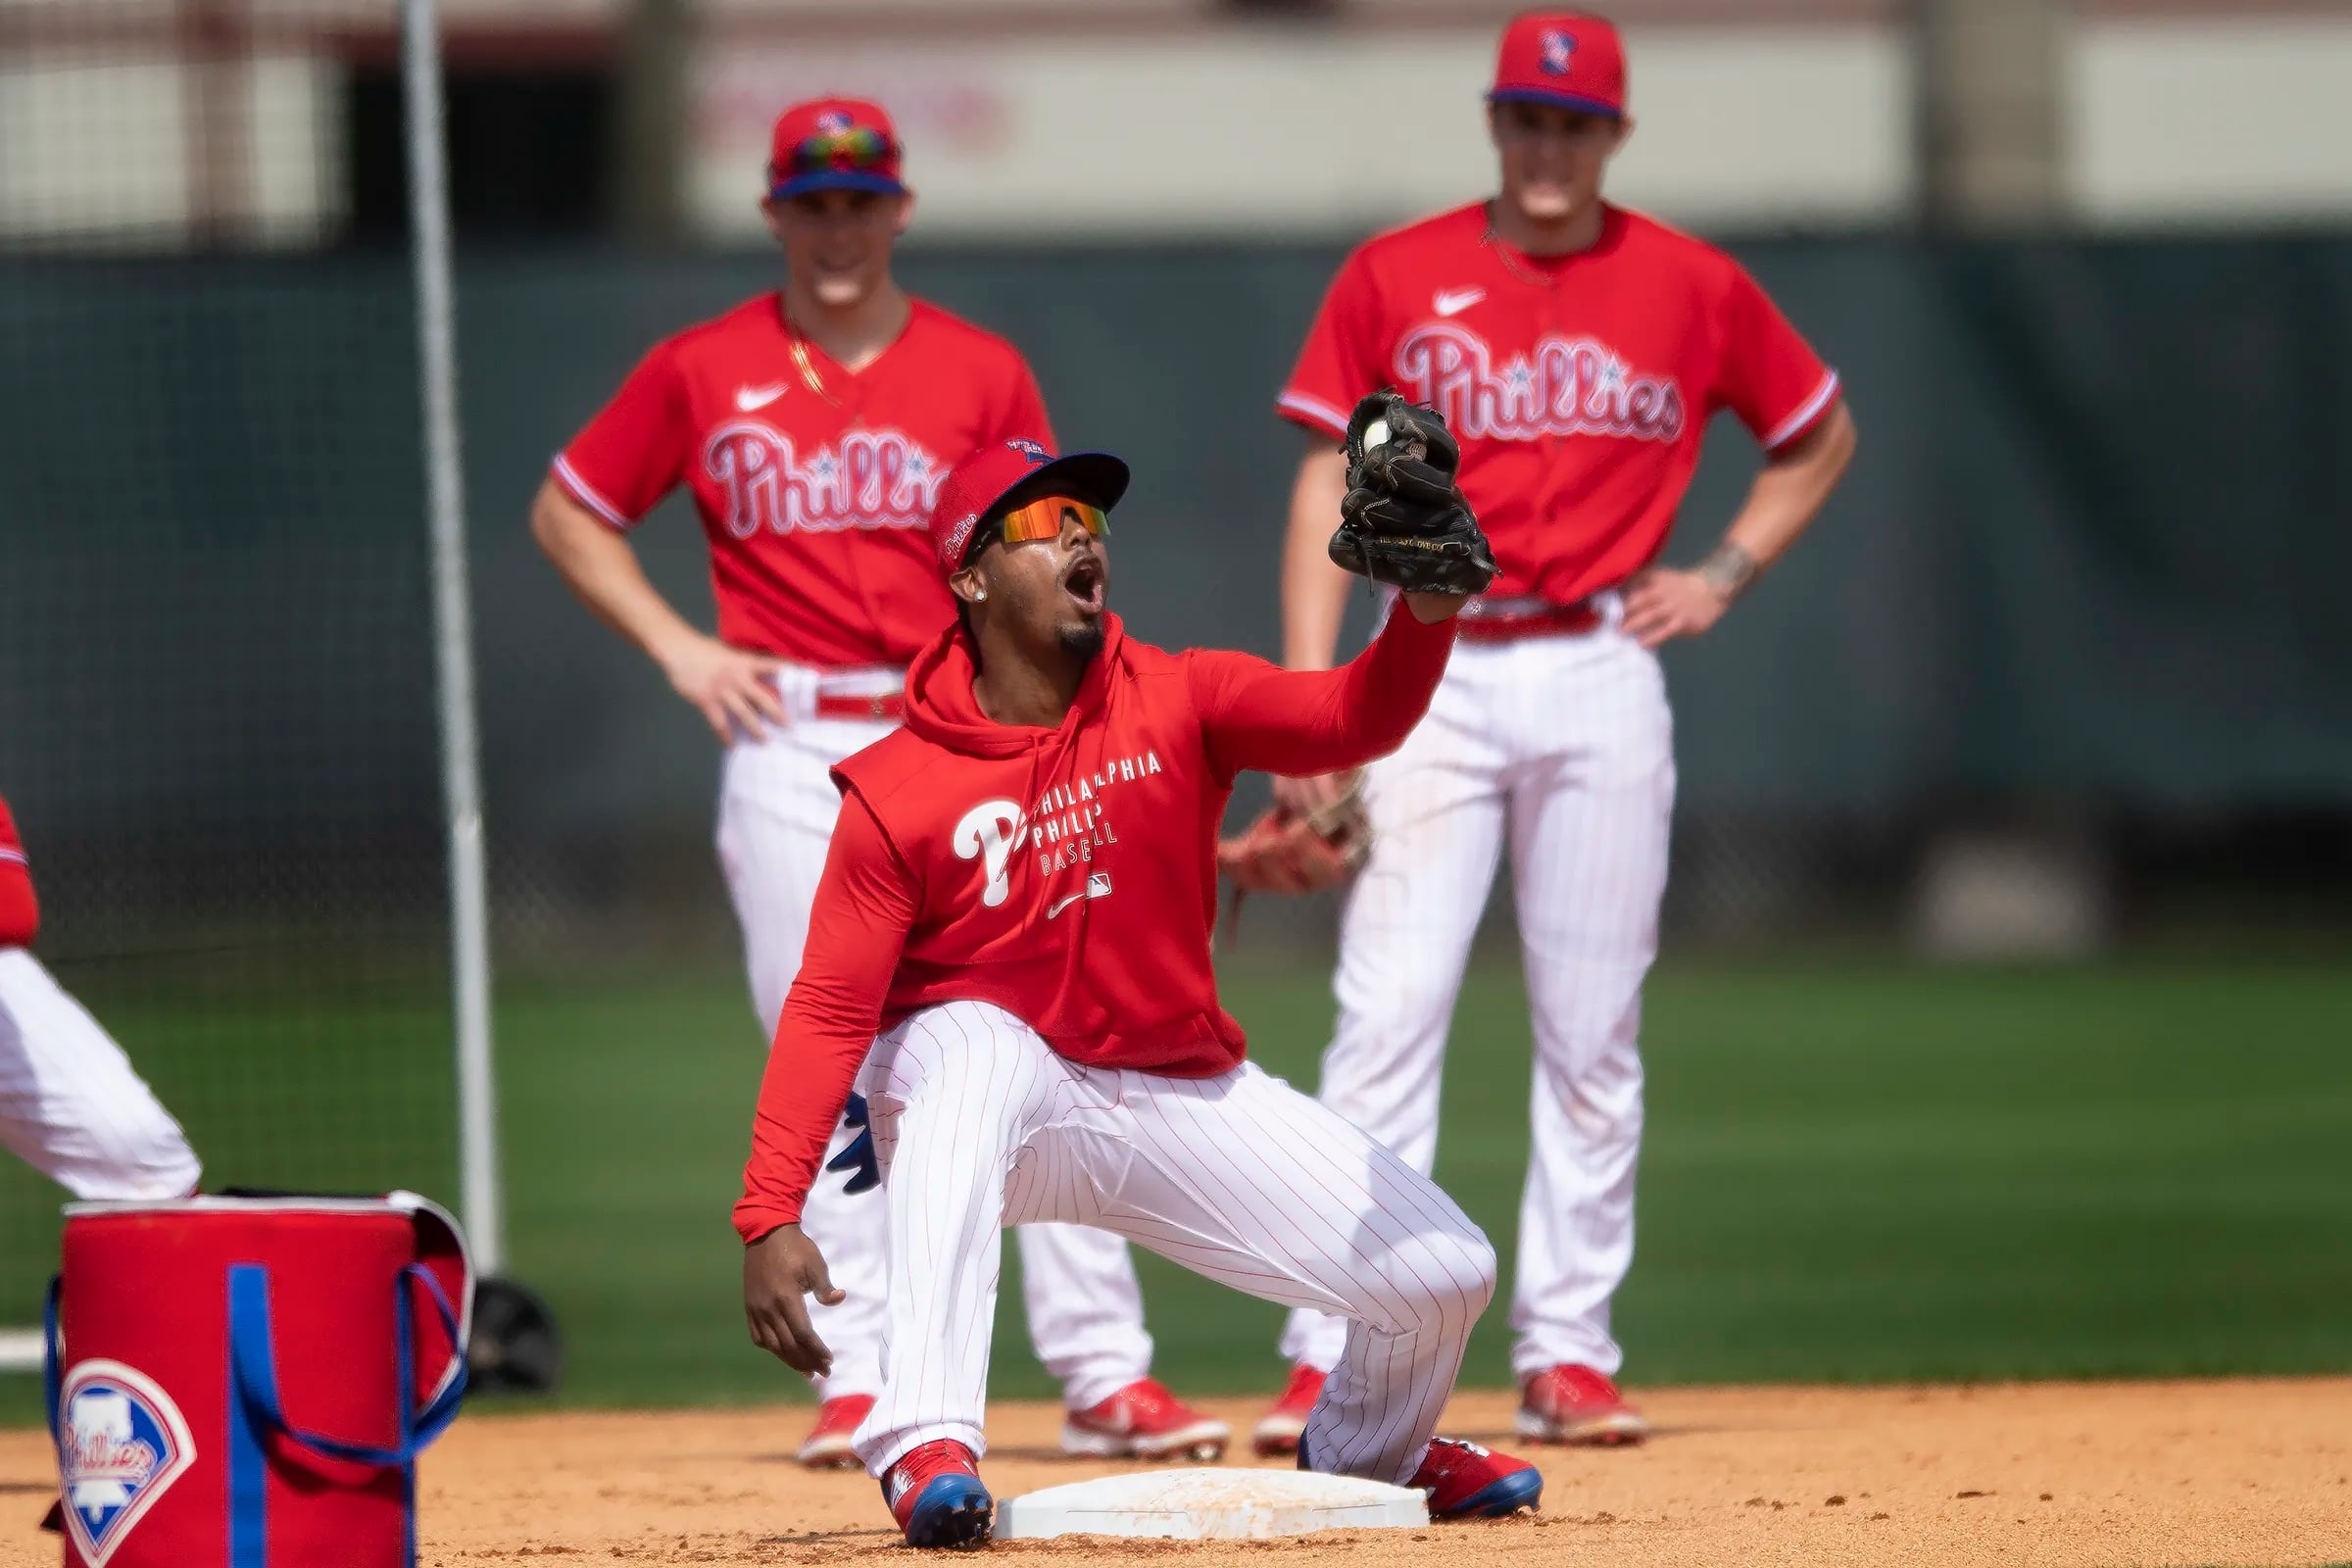 CLEARWATER, FL - FEBRUARY 21: Philadelphia Phillies outfielder Jhailyn  Ortiz (89) runs the bases during the spring training workout at Carpenter  Complex on February 21, 2023 in Clearwater, Florida. (Photo by Cliff